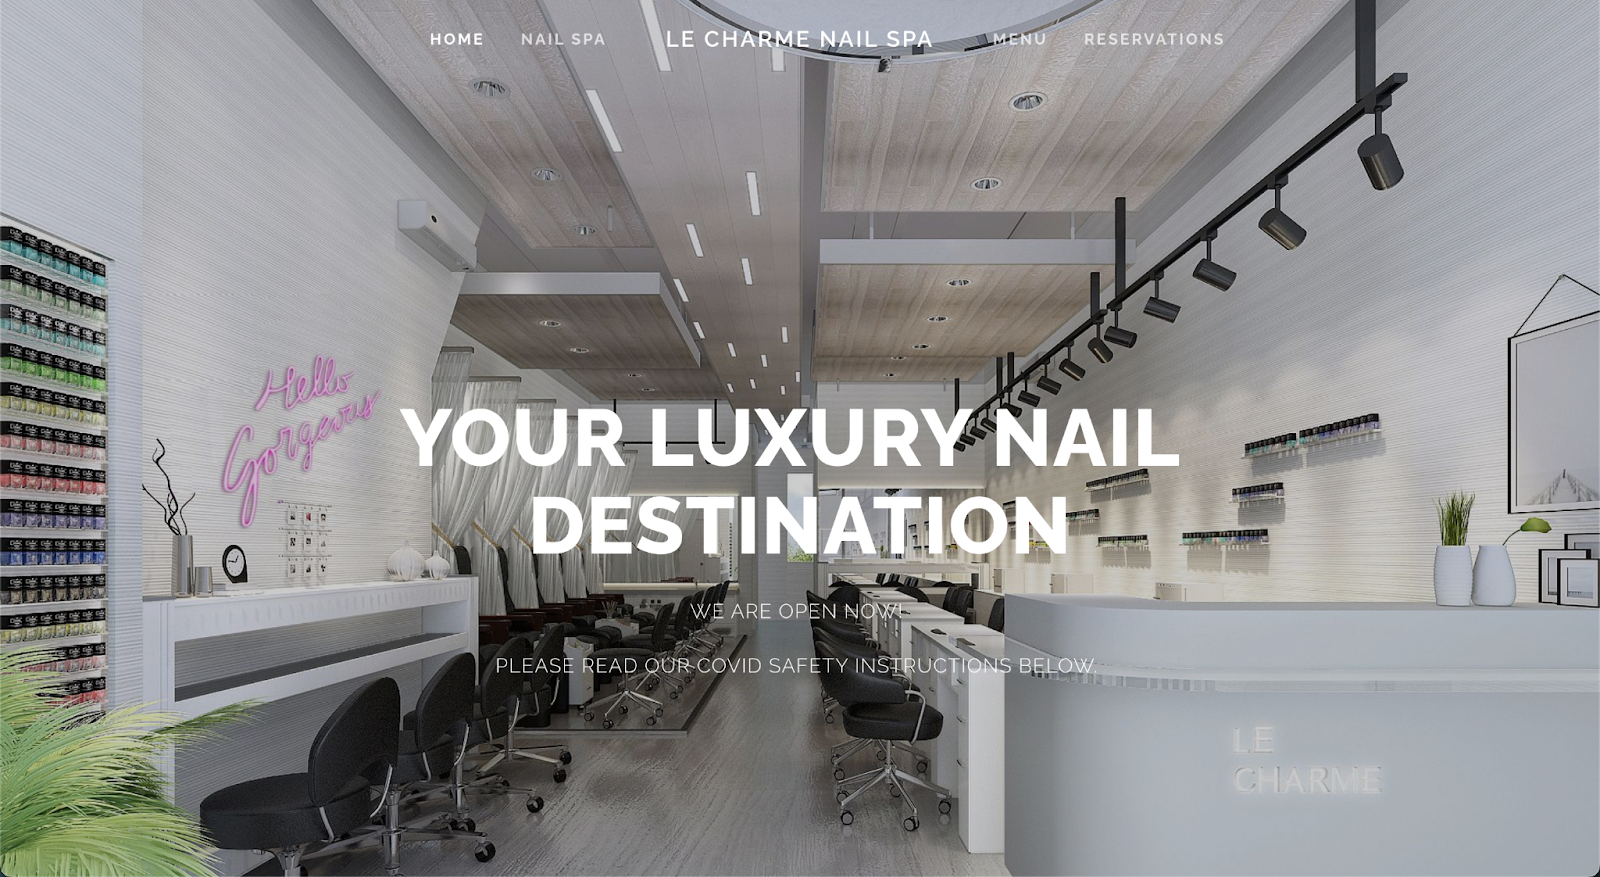 Best nail salon websites, example from Le Charme Nail Spa.